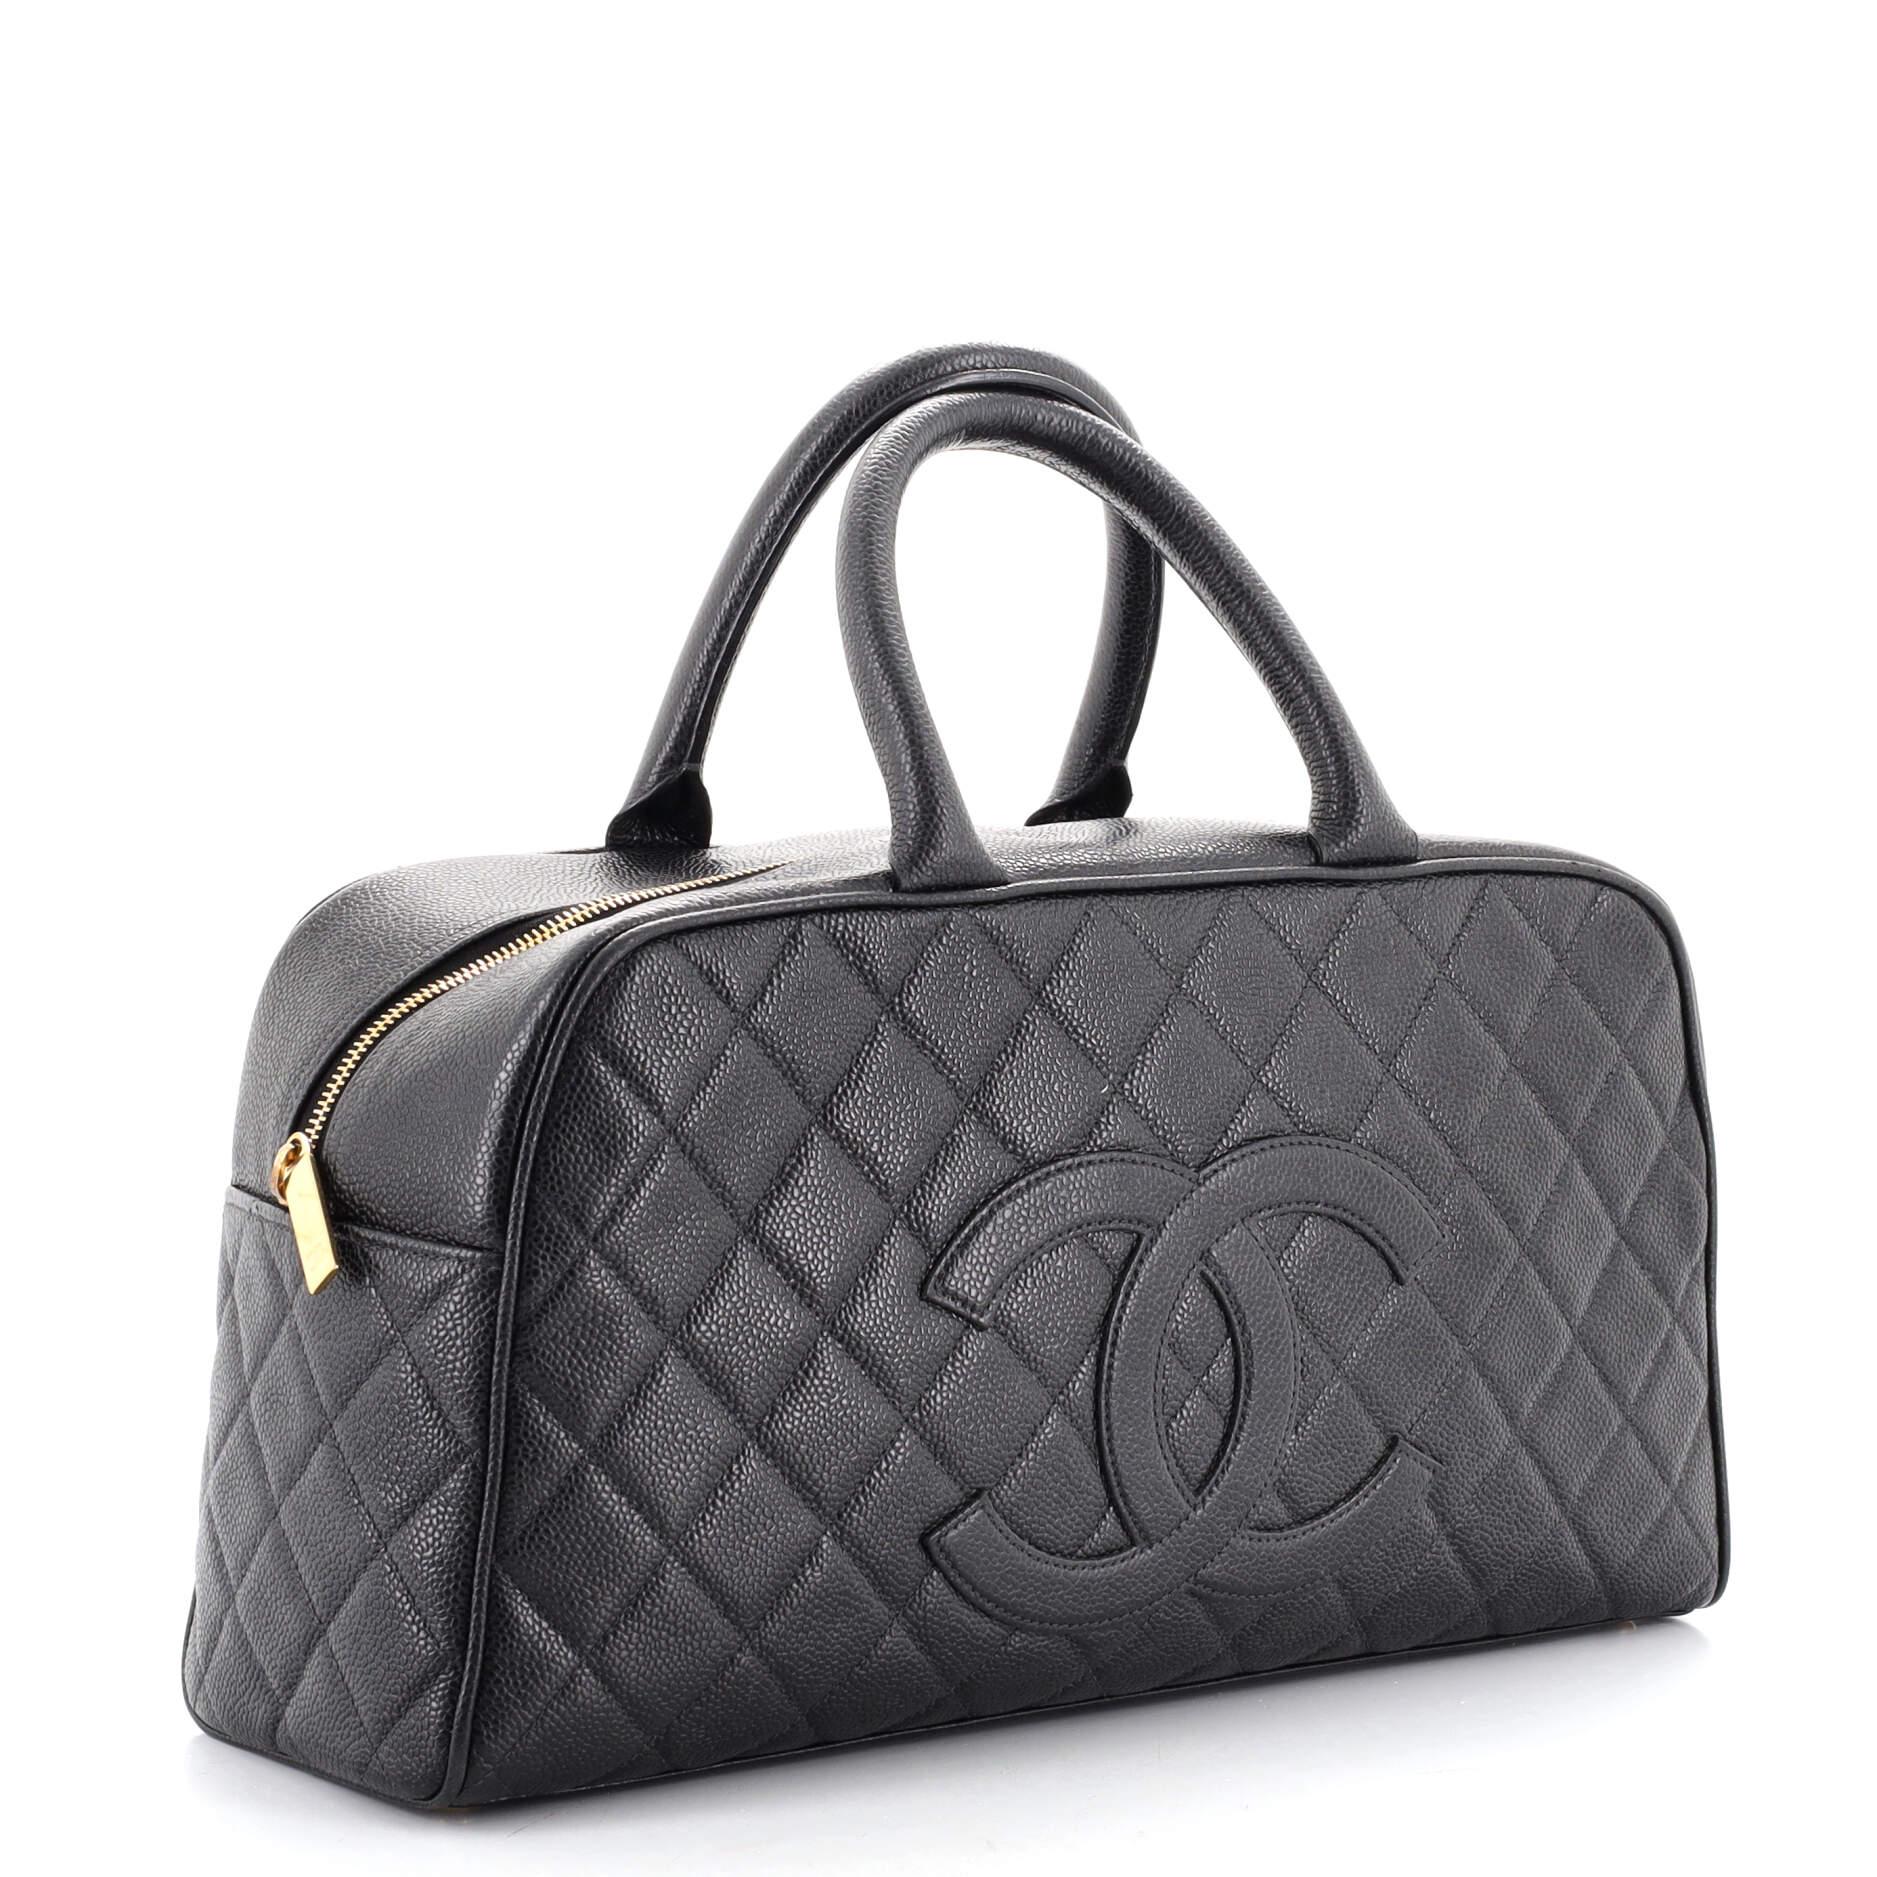 chanel bags